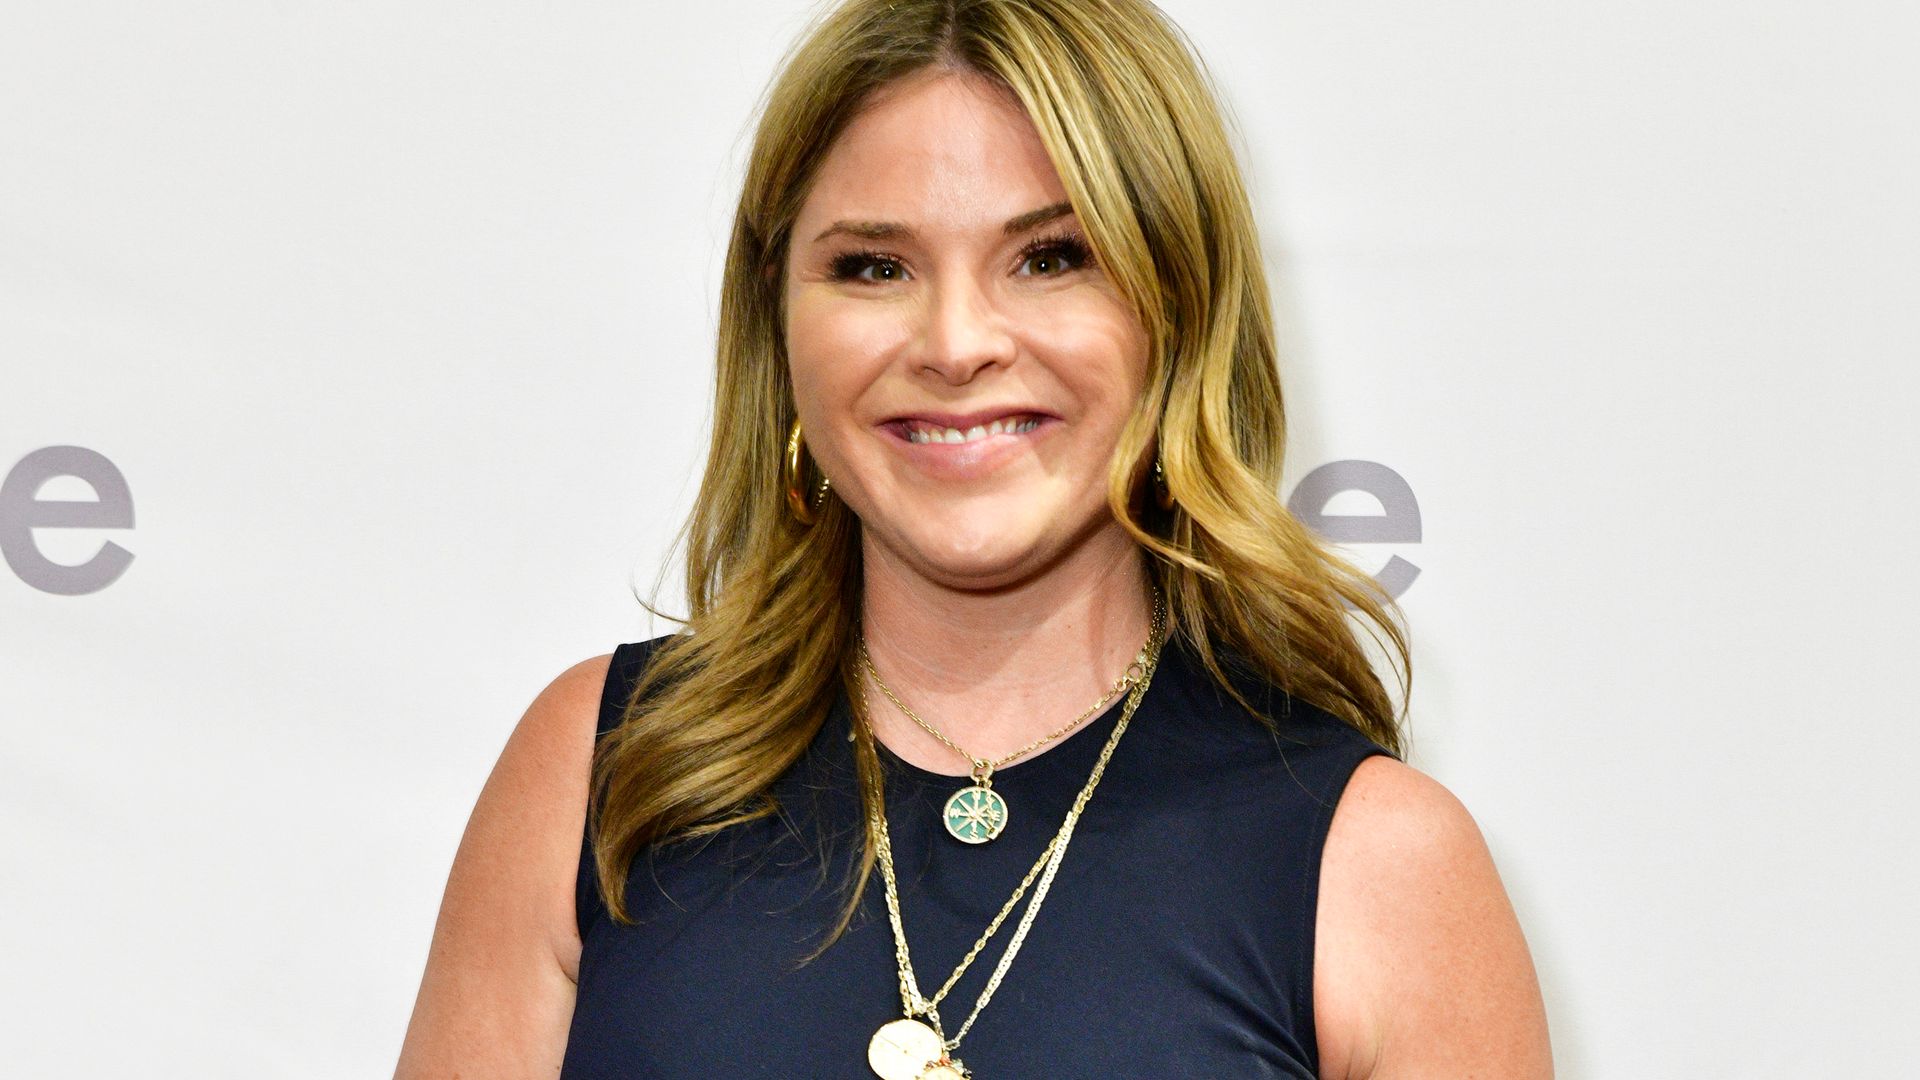 Jenna Bush Hager smiling at the camera on a red carpet